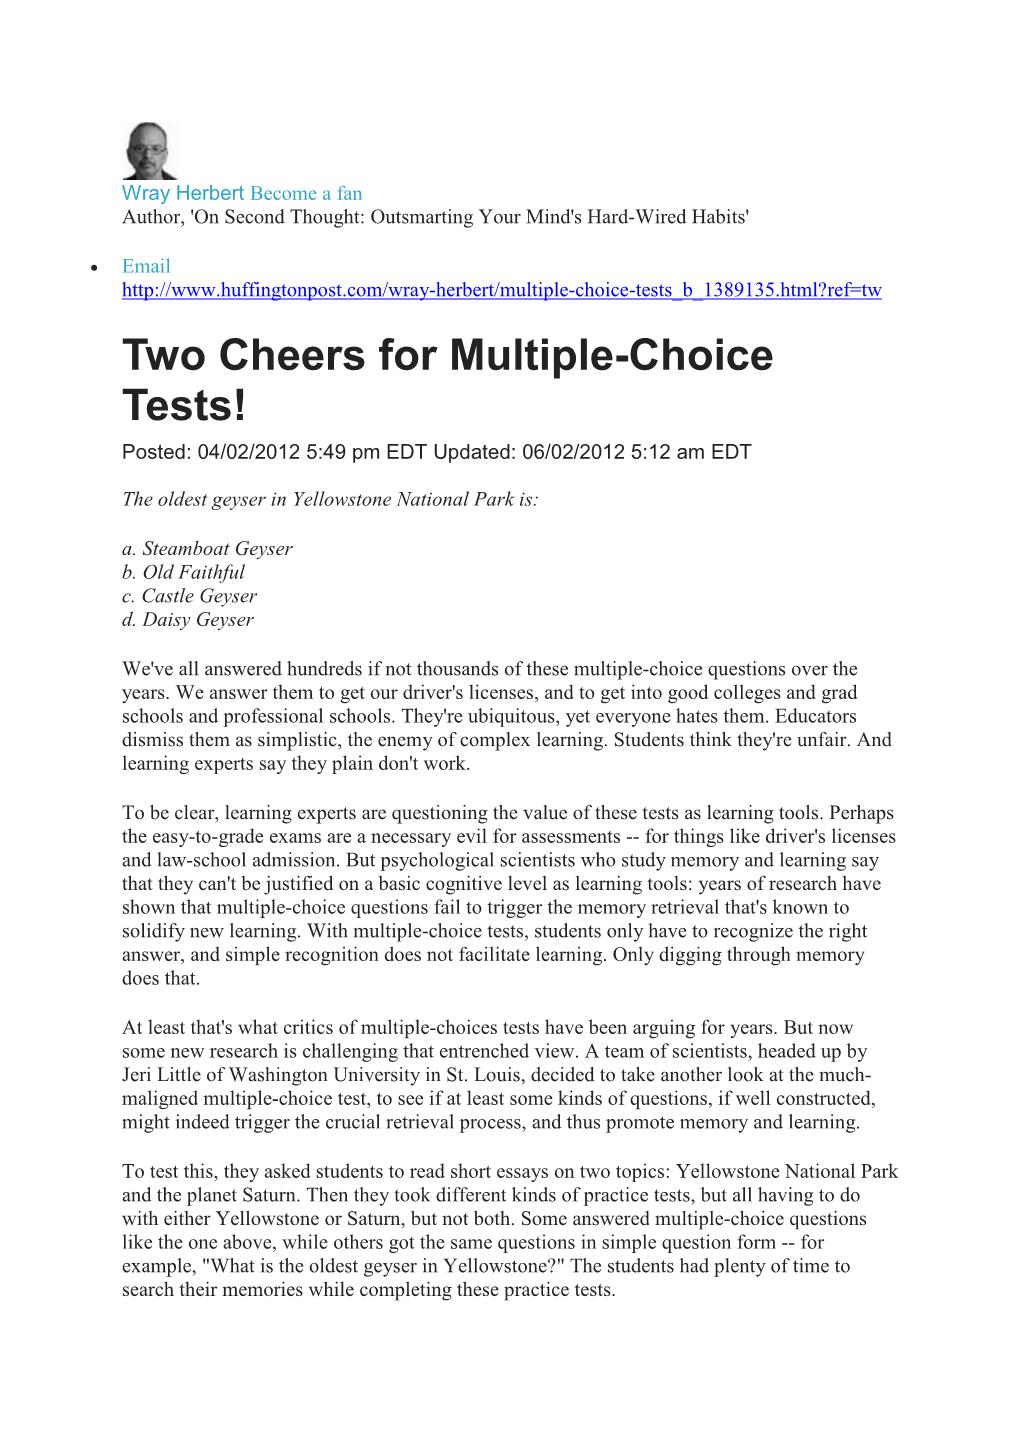 Two Cheers for Multiple-Choice Tests! Posted: 04/02/2012 5:49 Pm EDT Updated: 06/02/2012 5:12 Am EDT